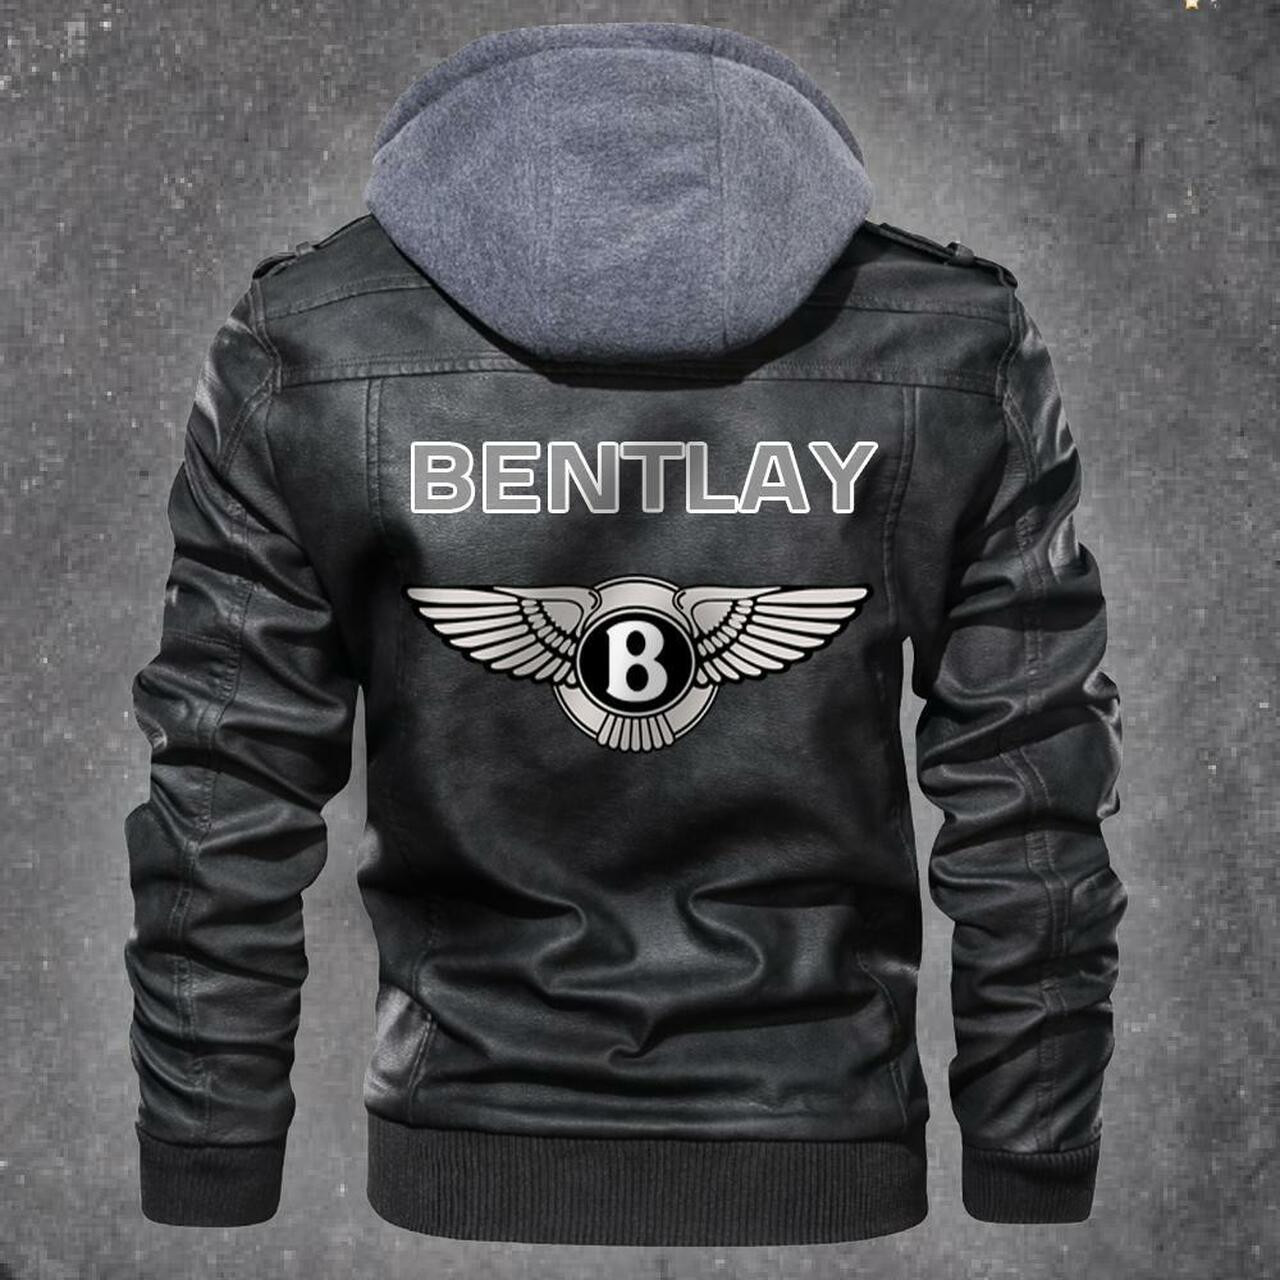 Check out our collection of the latest and greatest leather jacket 111